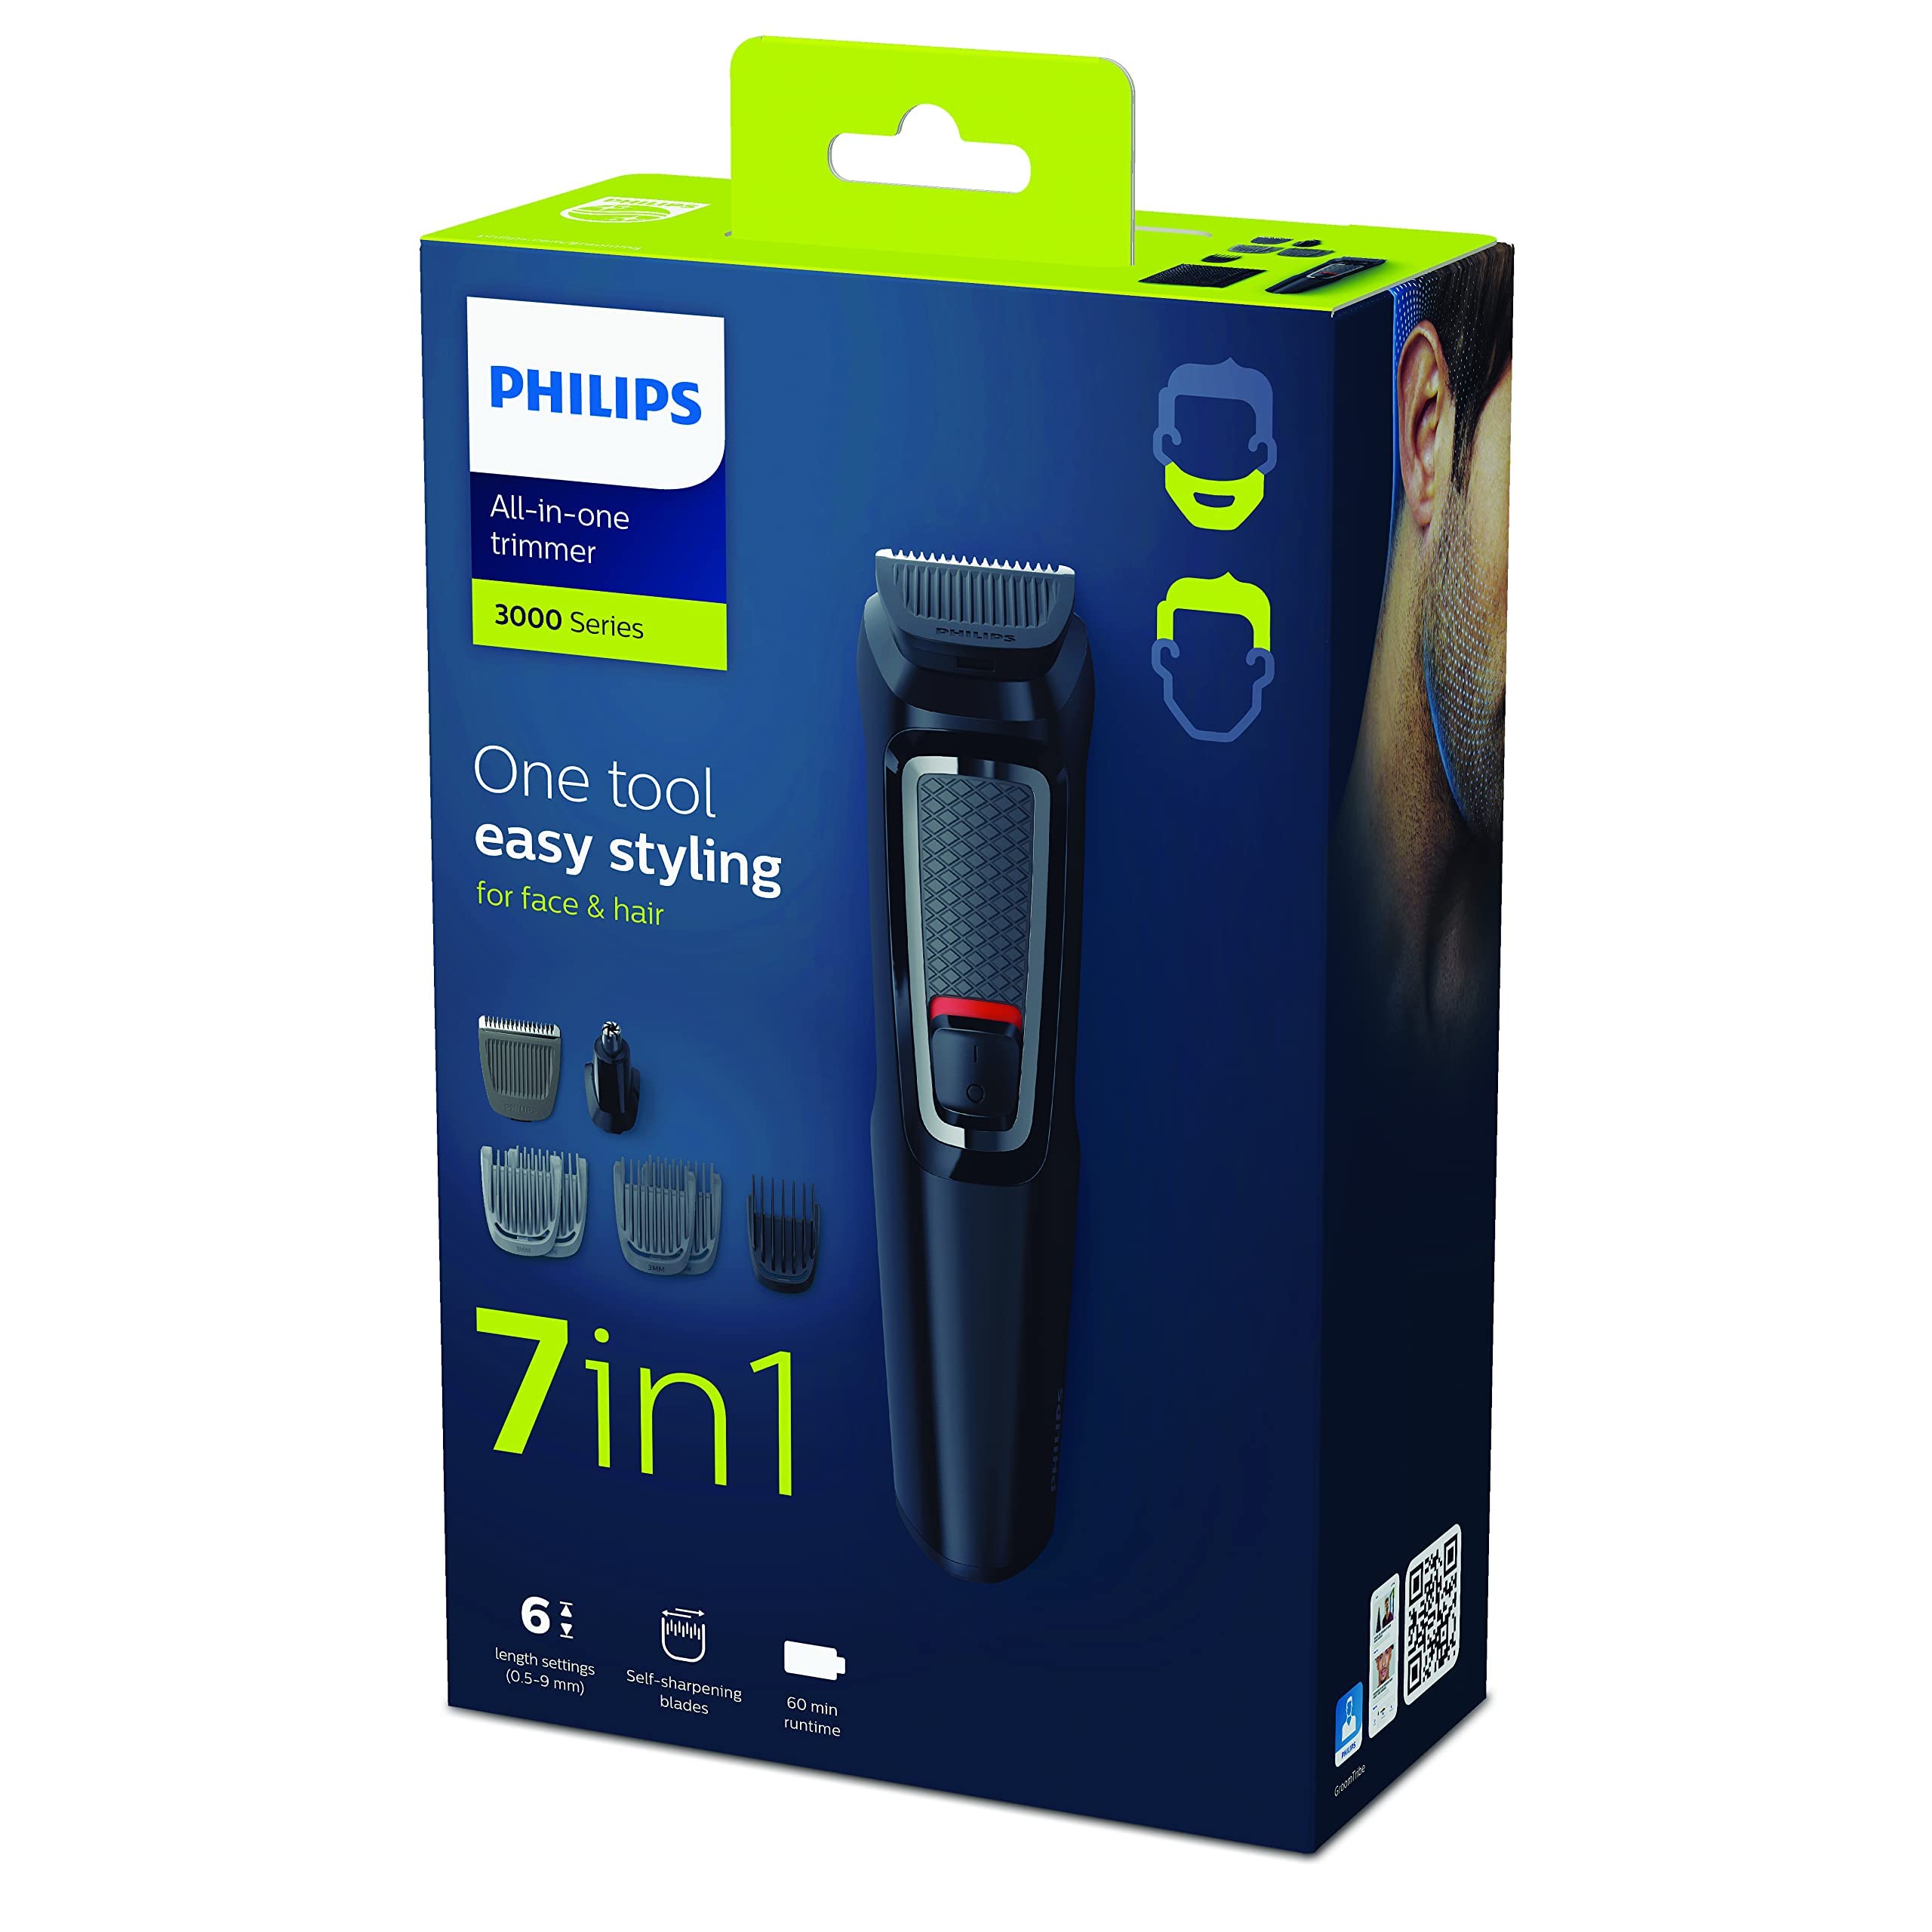 Philips 7-in-1 All-In-One Trimmer Series 3000 Grooming Kit for Beard & Hair  with 7 Attachments Including Nose Trimmer Self-Sharpening Blades UK 3-Pin  Plug-MG3720/33 7-in-1 Multigroom